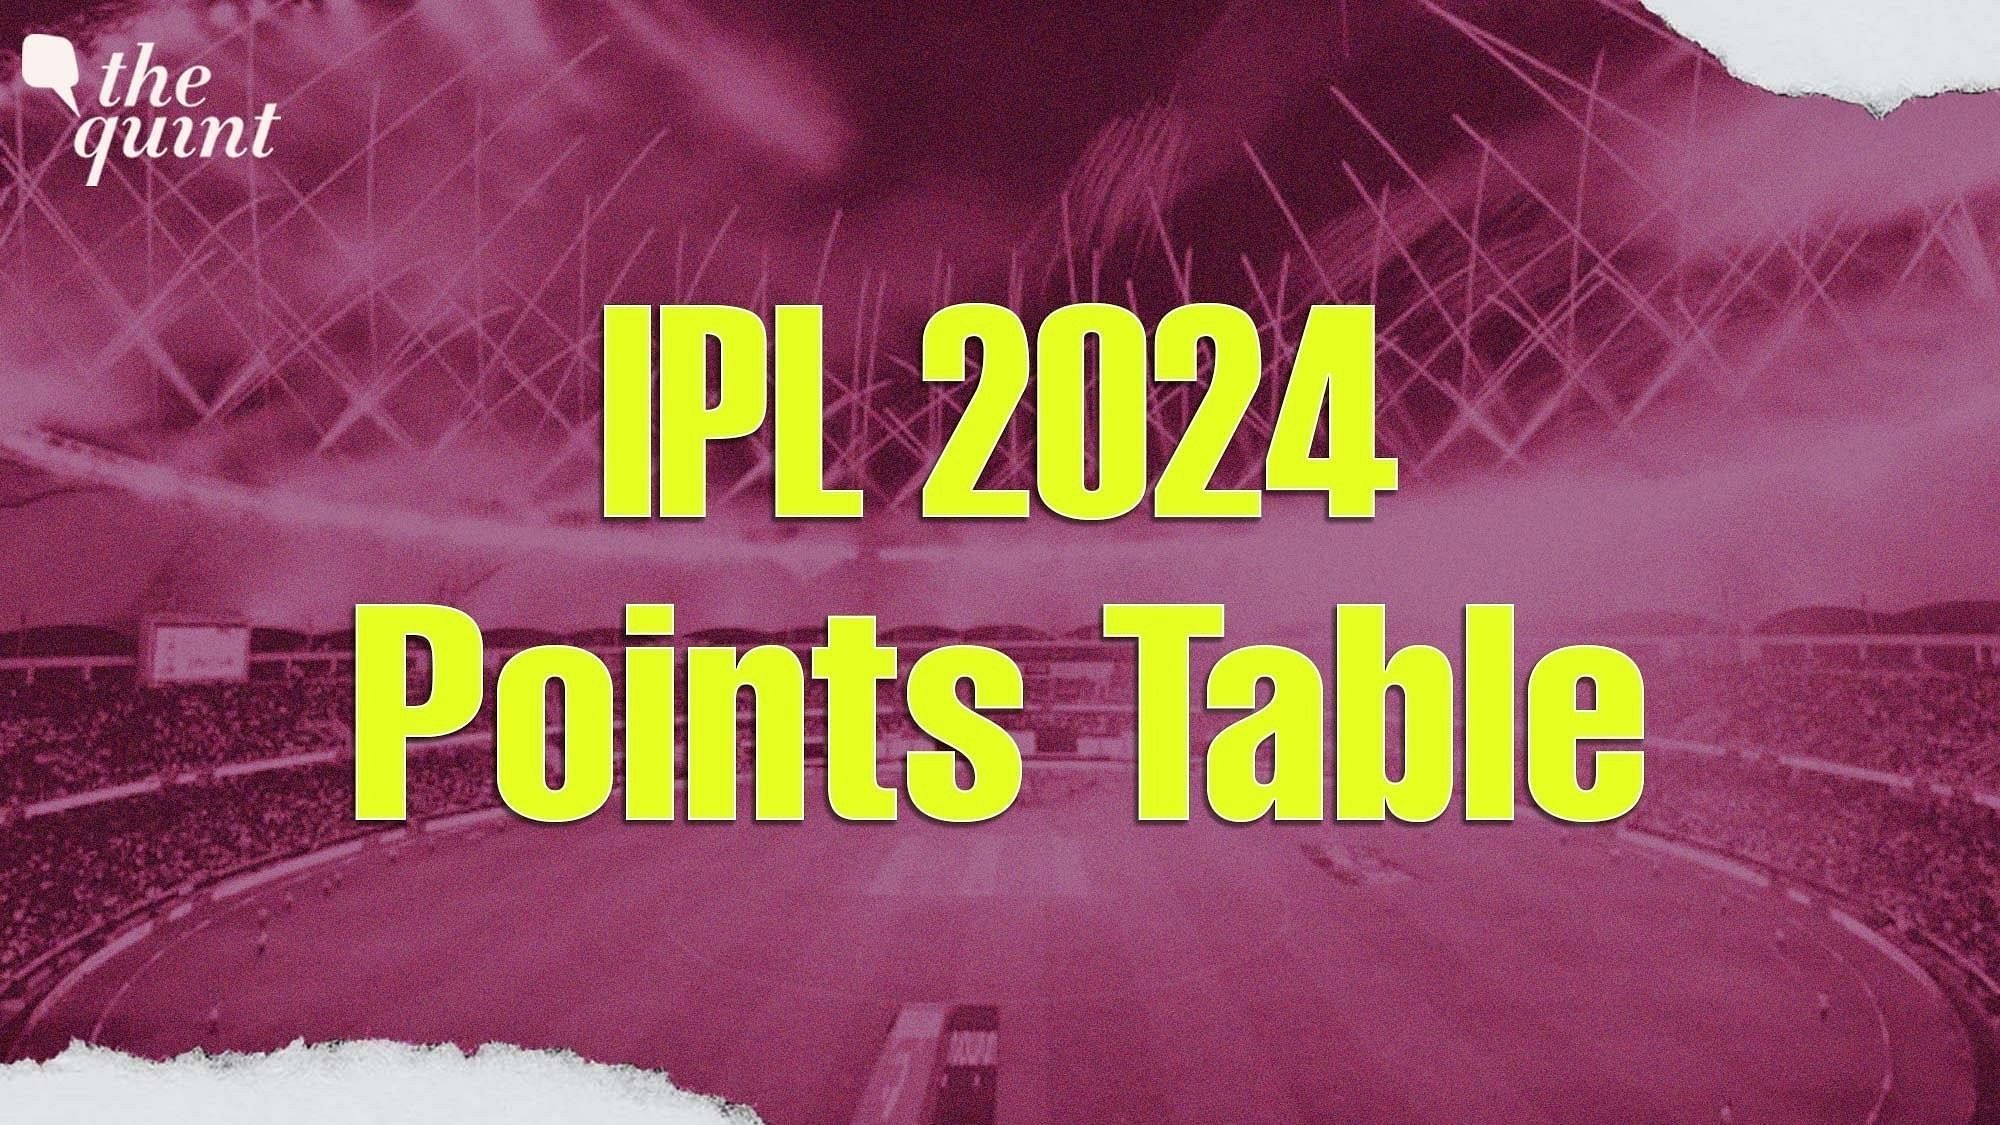 <div class="paragraphs"><p>Know the updated team standings in the IPL 2024 points table after&nbsp;MI vs CSK Match.</p></div>